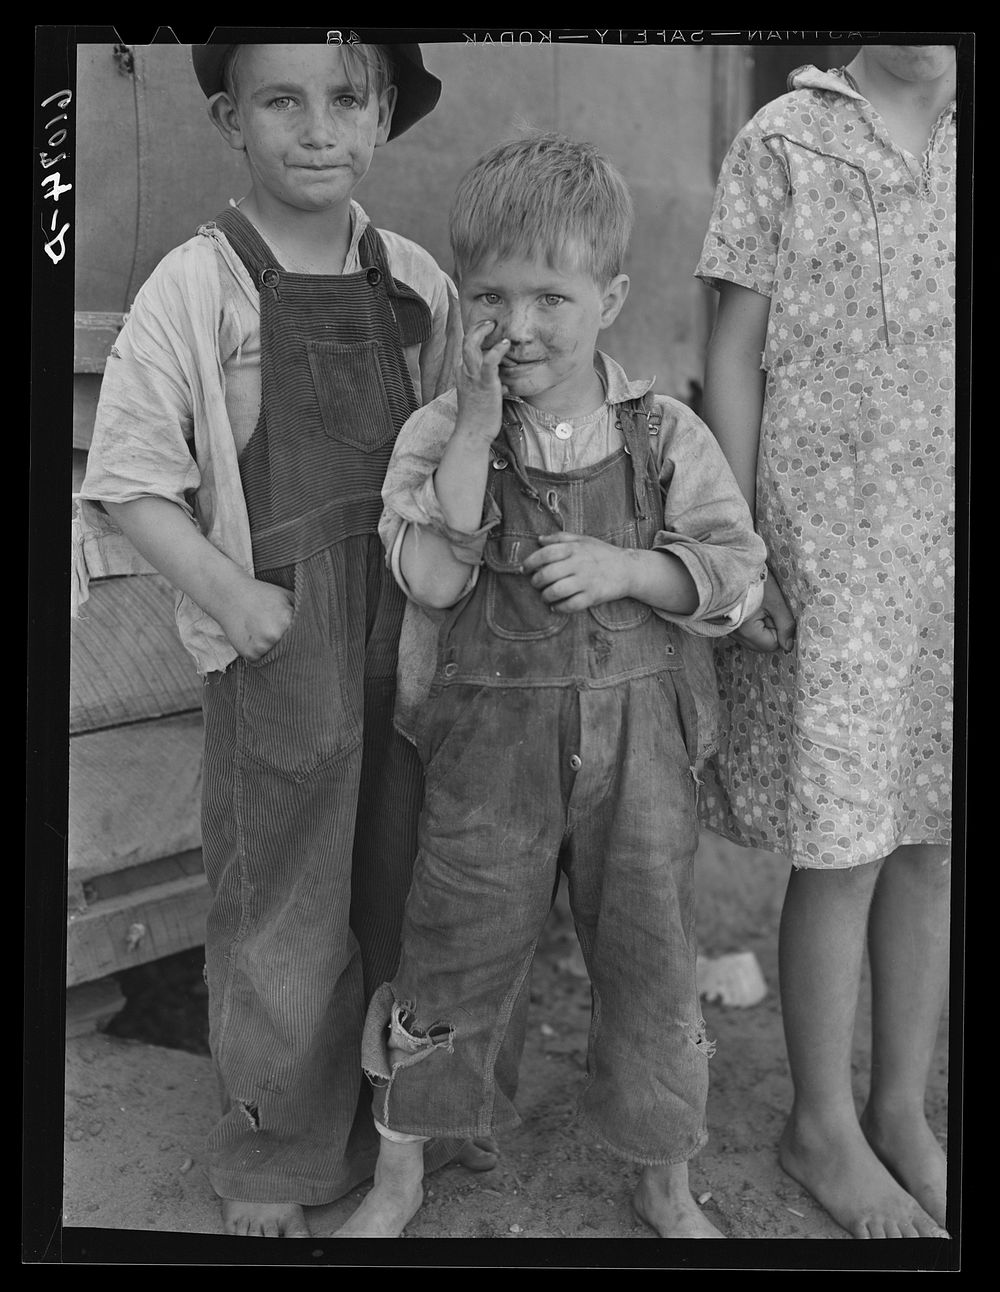 Children of family living on the other side of the levee, along Mississippi riverbottoms. They will move to one of the new…